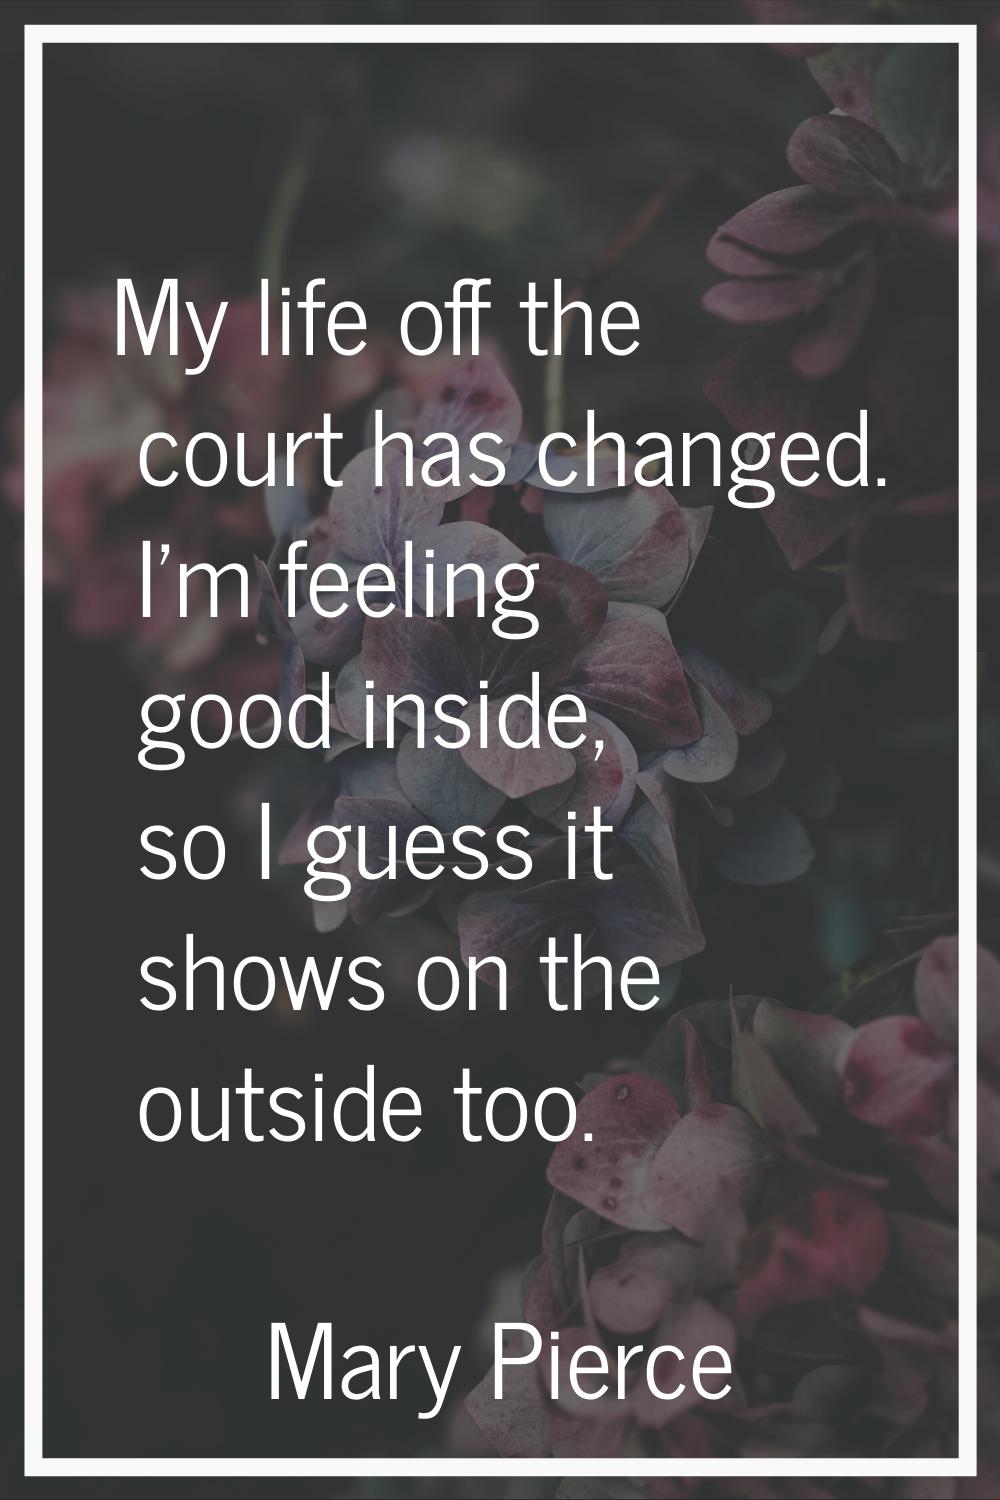 My life off the court has changed. I'm feeling good inside, so I guess it shows on the outside too.